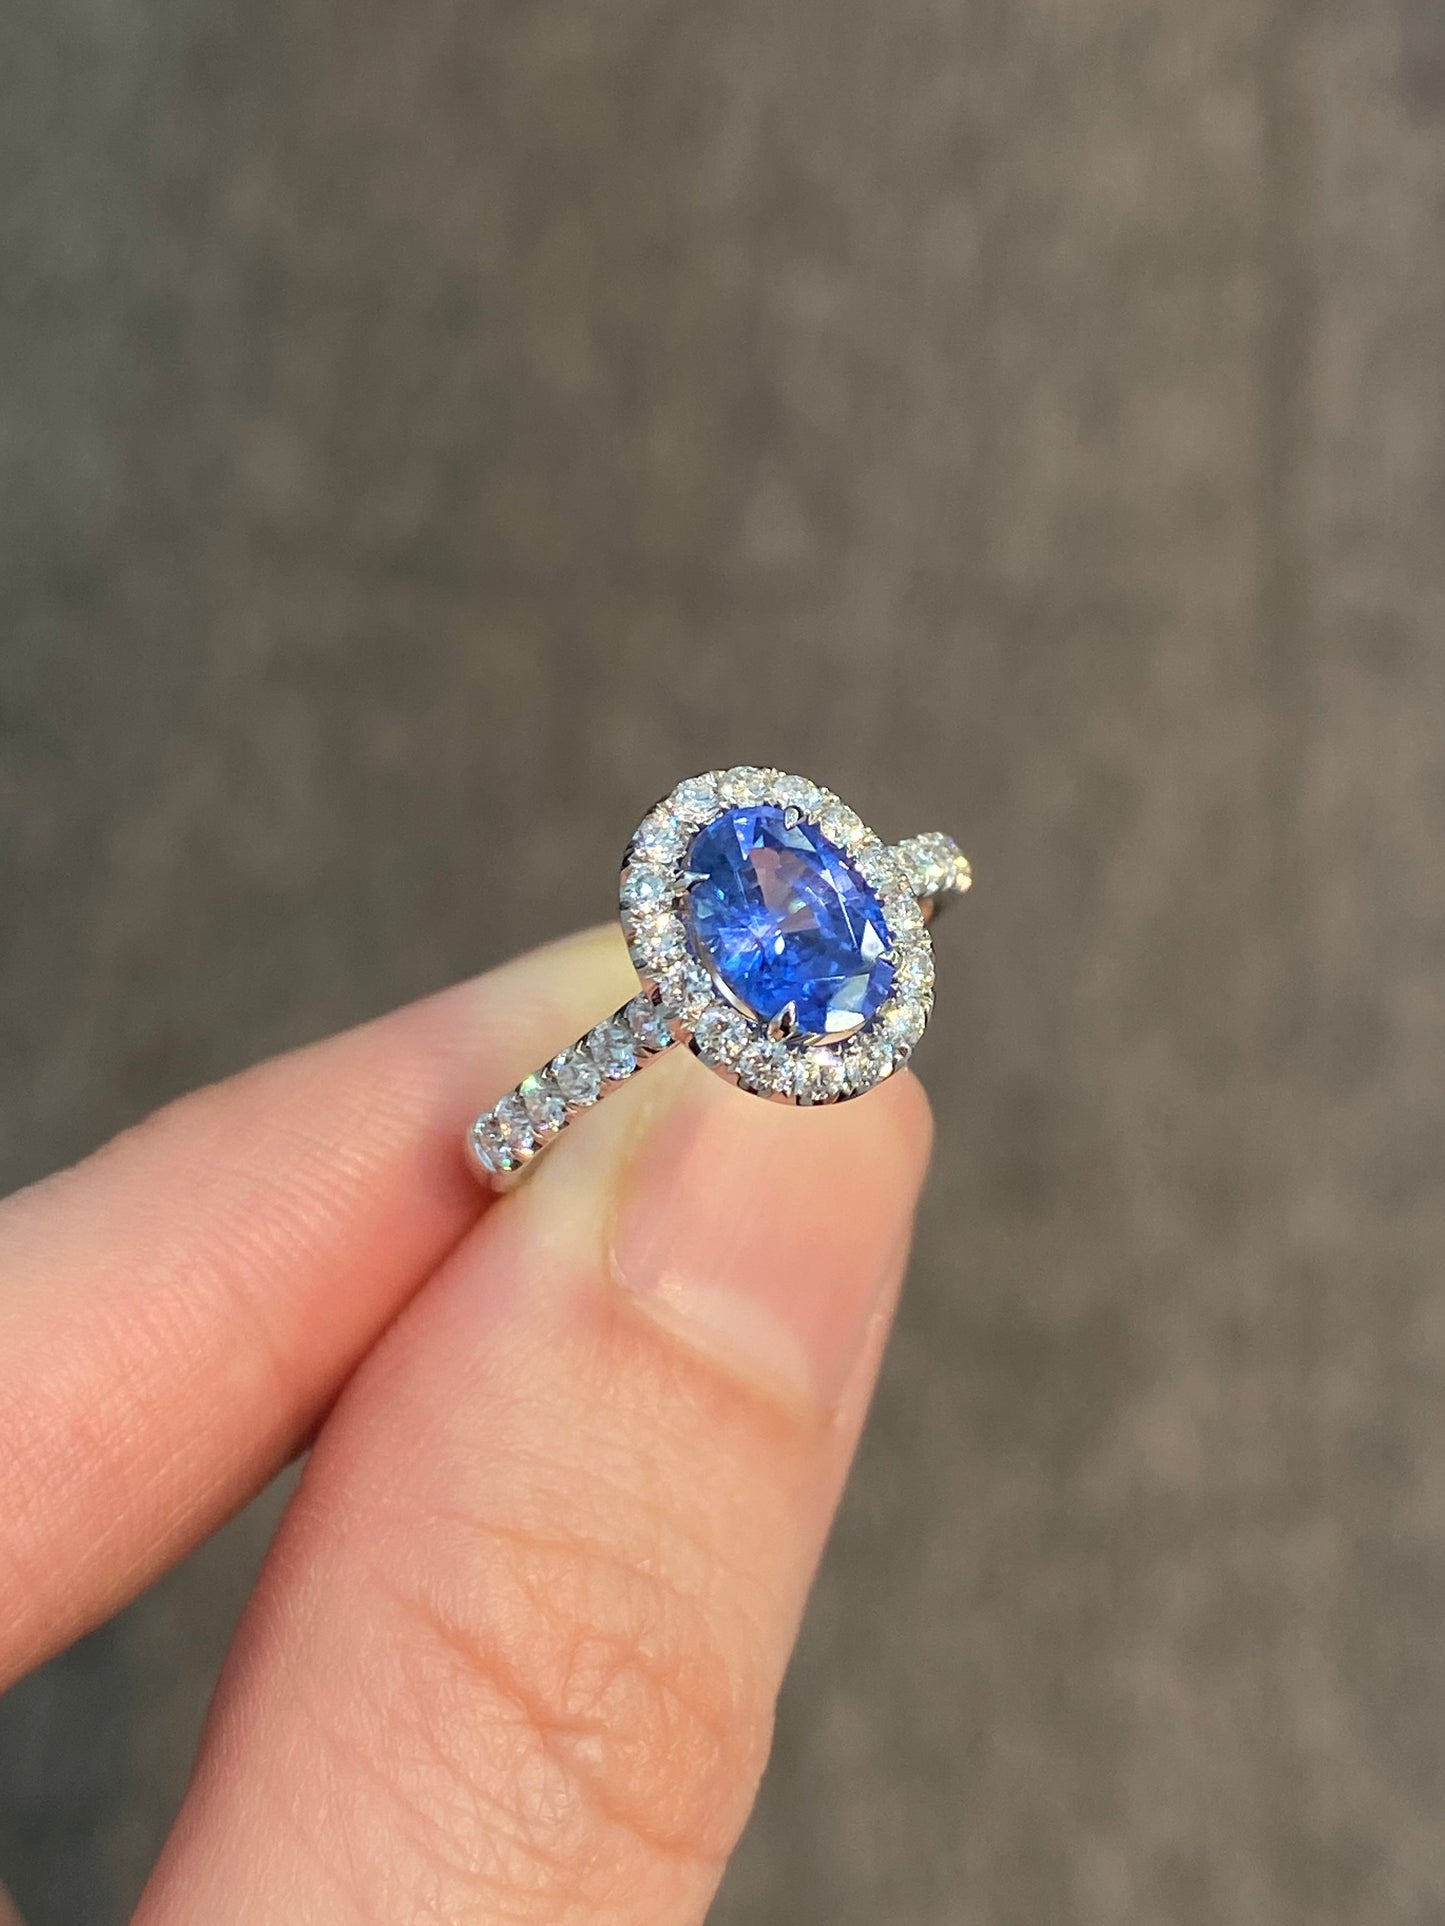 Natural Unheated Cornflower Blue Sapphire 1.27ct Ring Set With Natural Diamond In 18K White Gold Singapore Gemstone Fine Jewellery